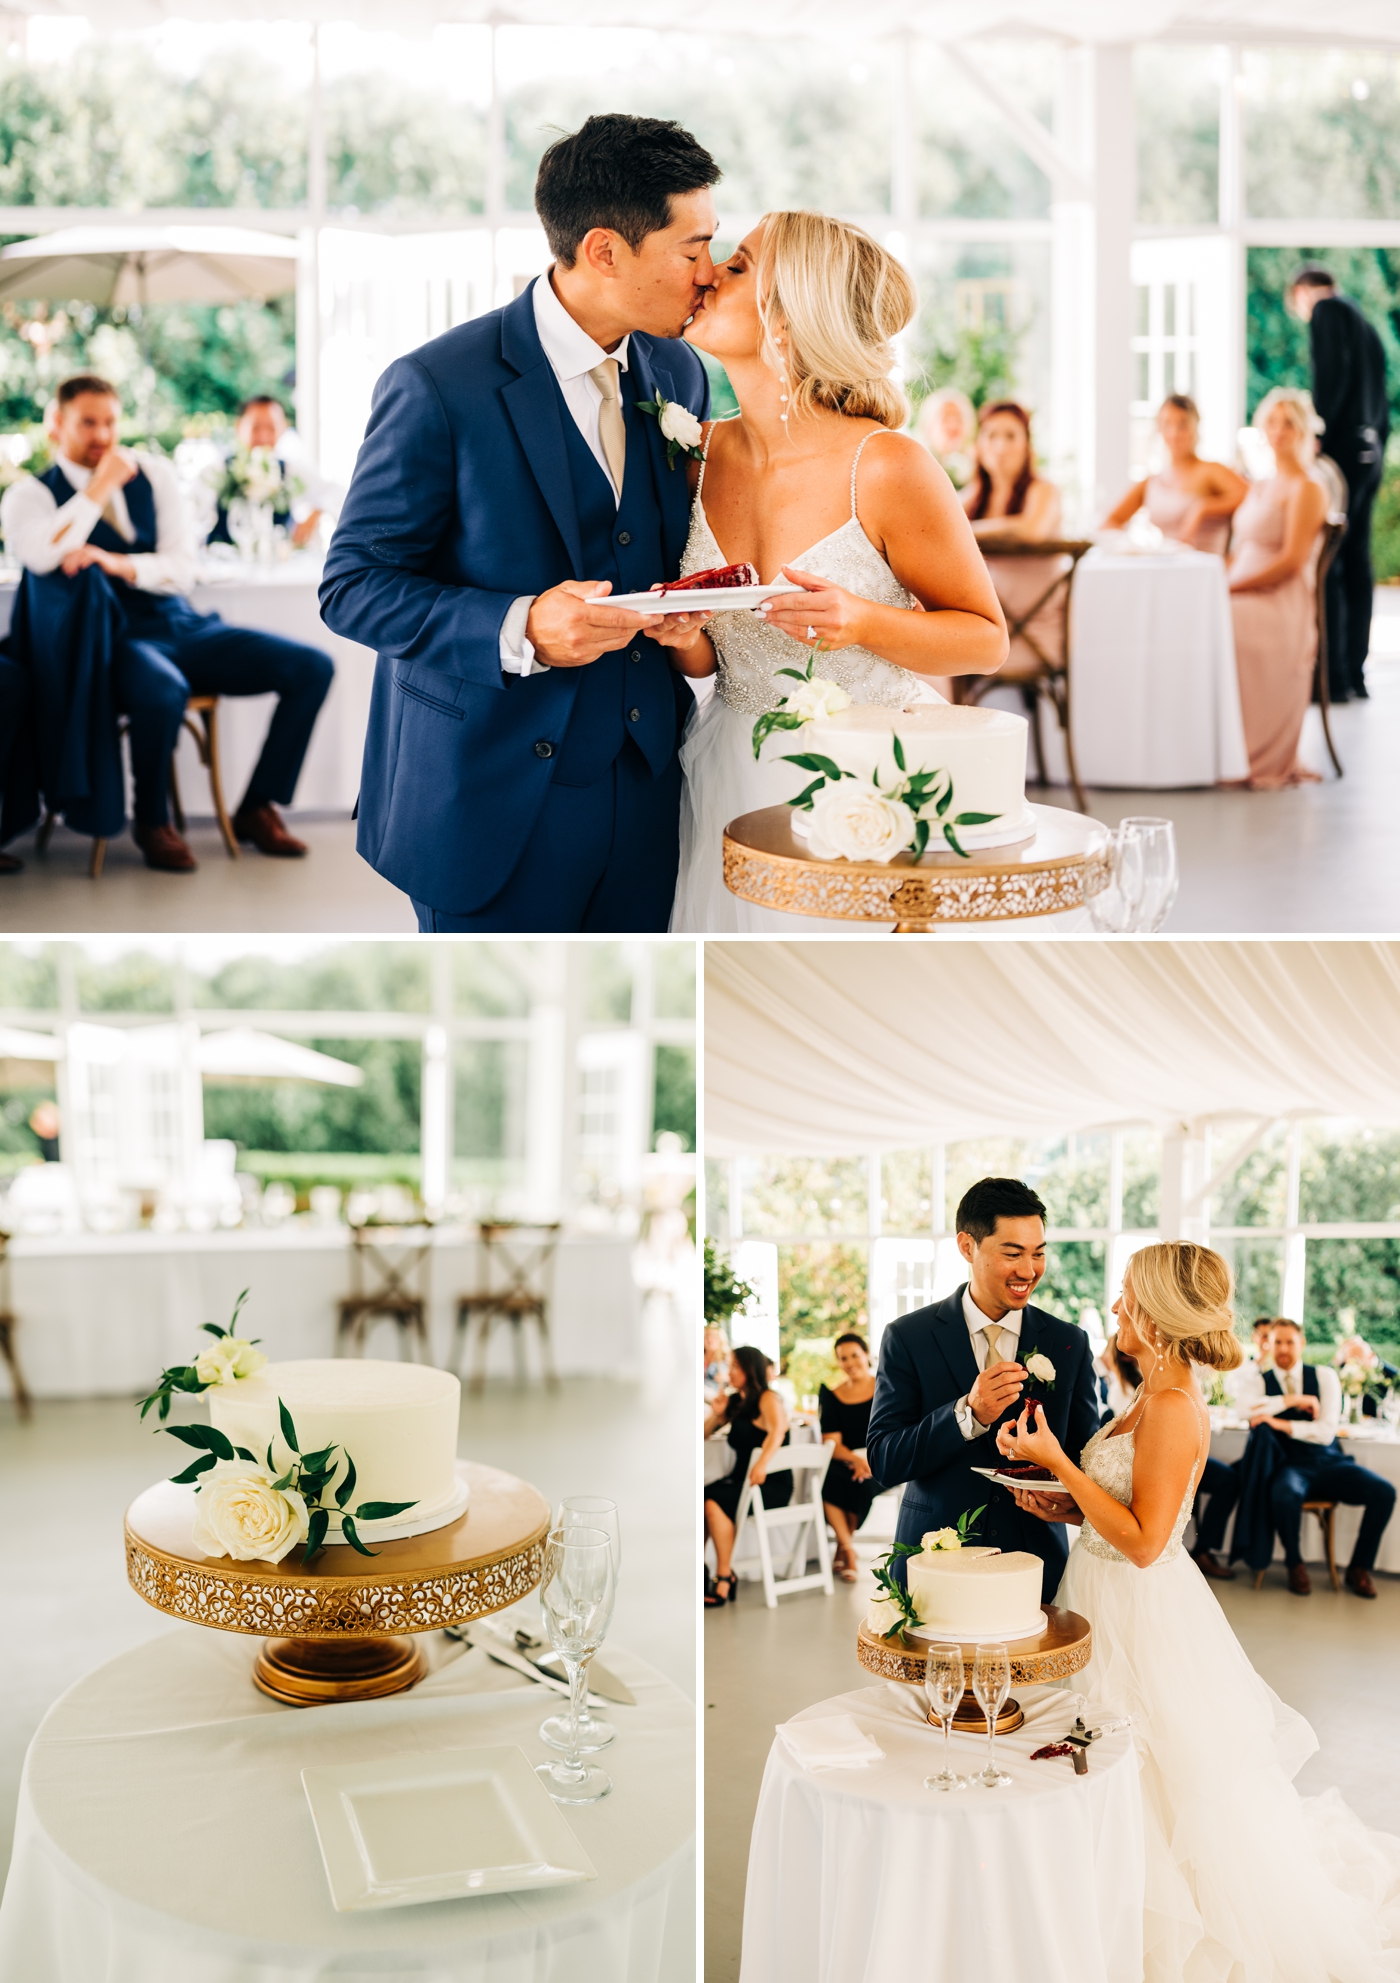 Bride and groom cutting the cake at their reception at the Garden Pavilion